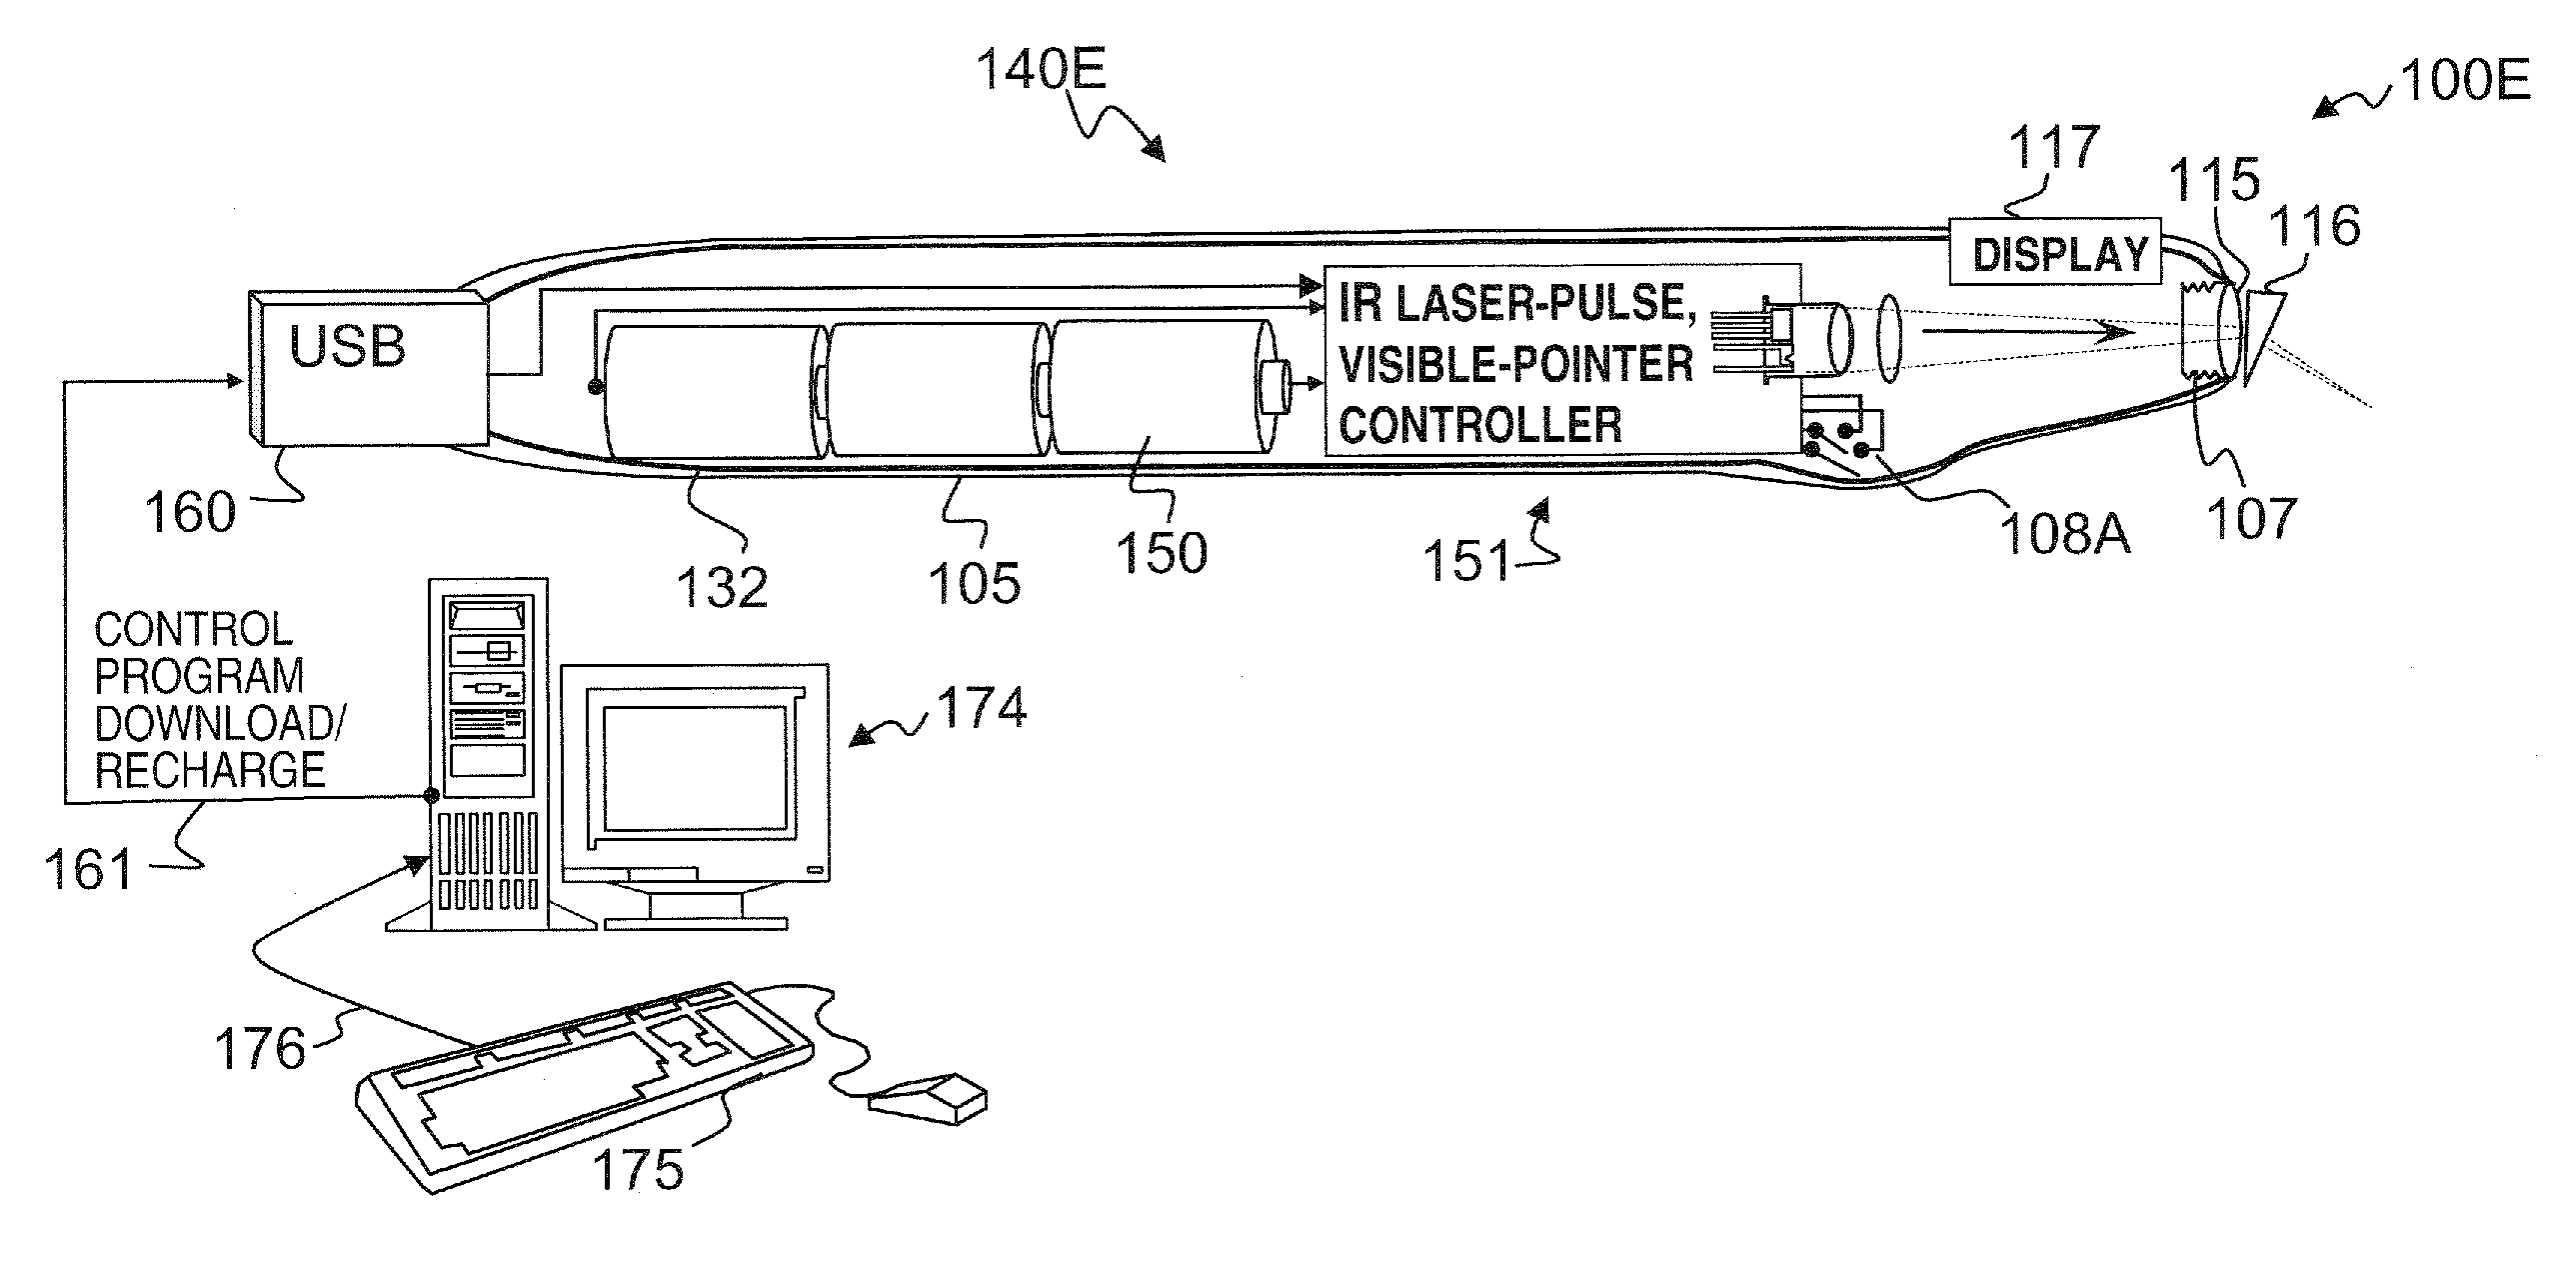 Miniature apparatus and method for optical stimulation of nerves and other animal tissue